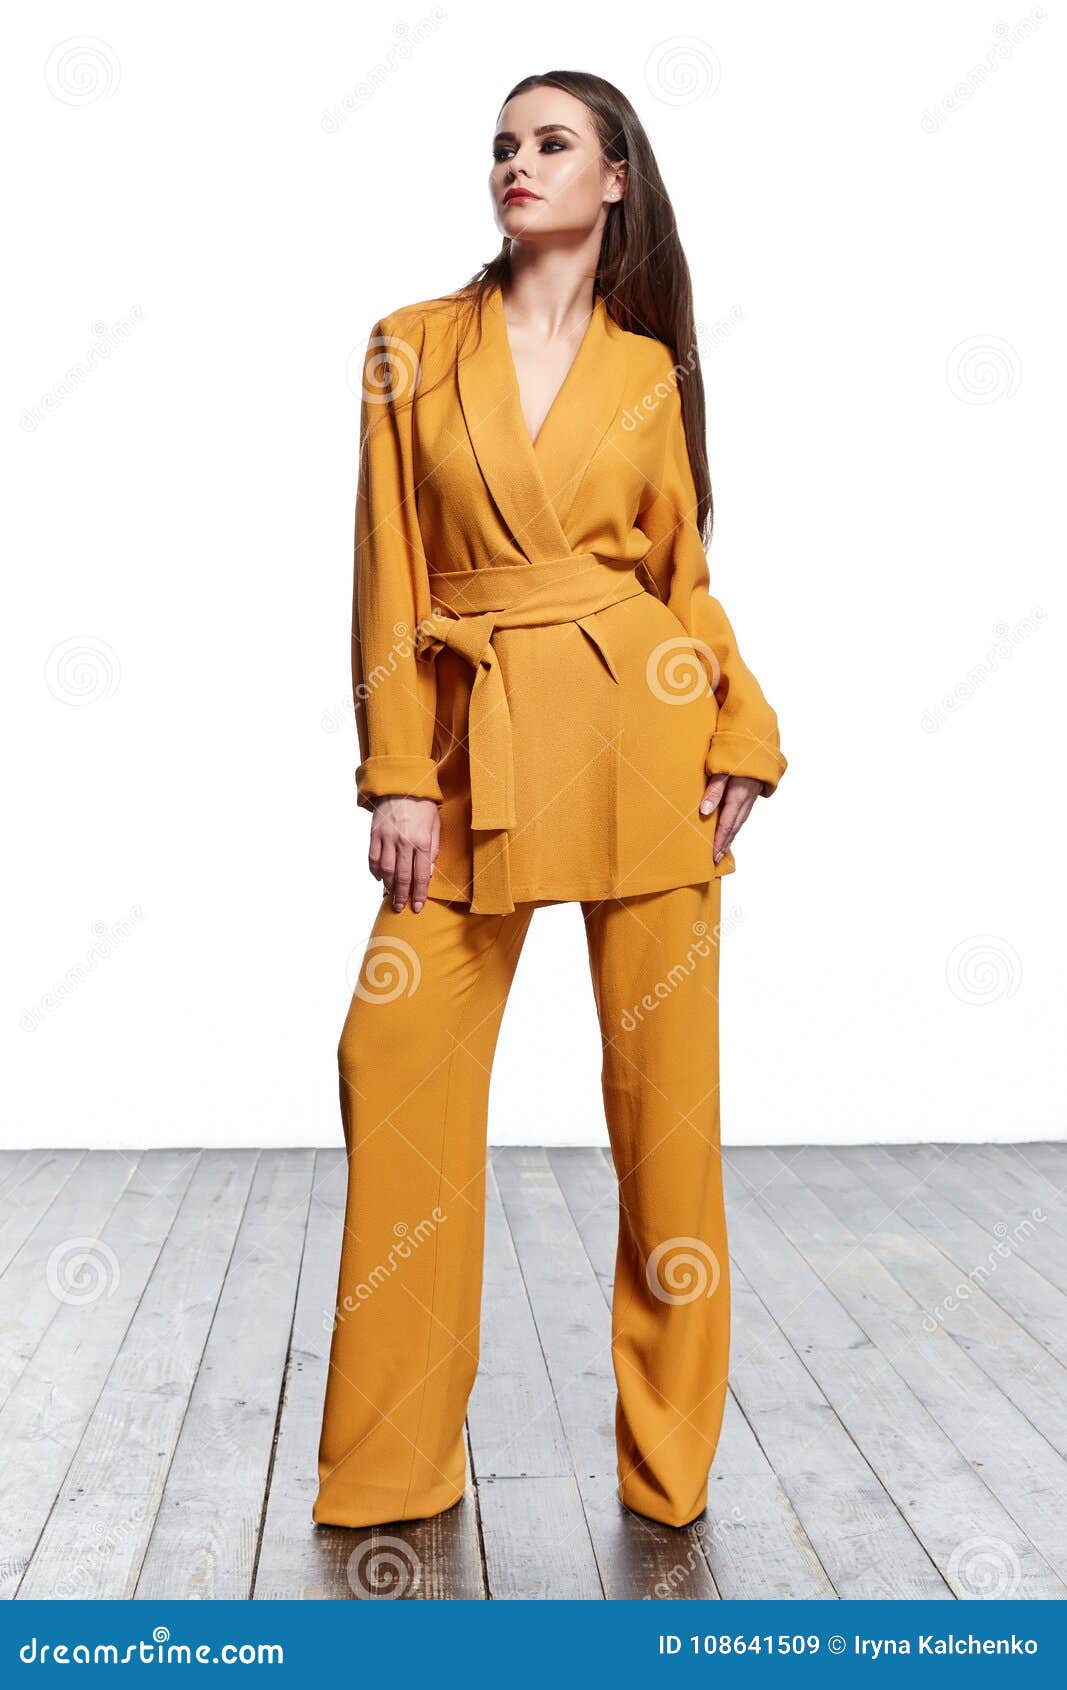 How to style a yellow suit - VERSICOLOR CLOSET